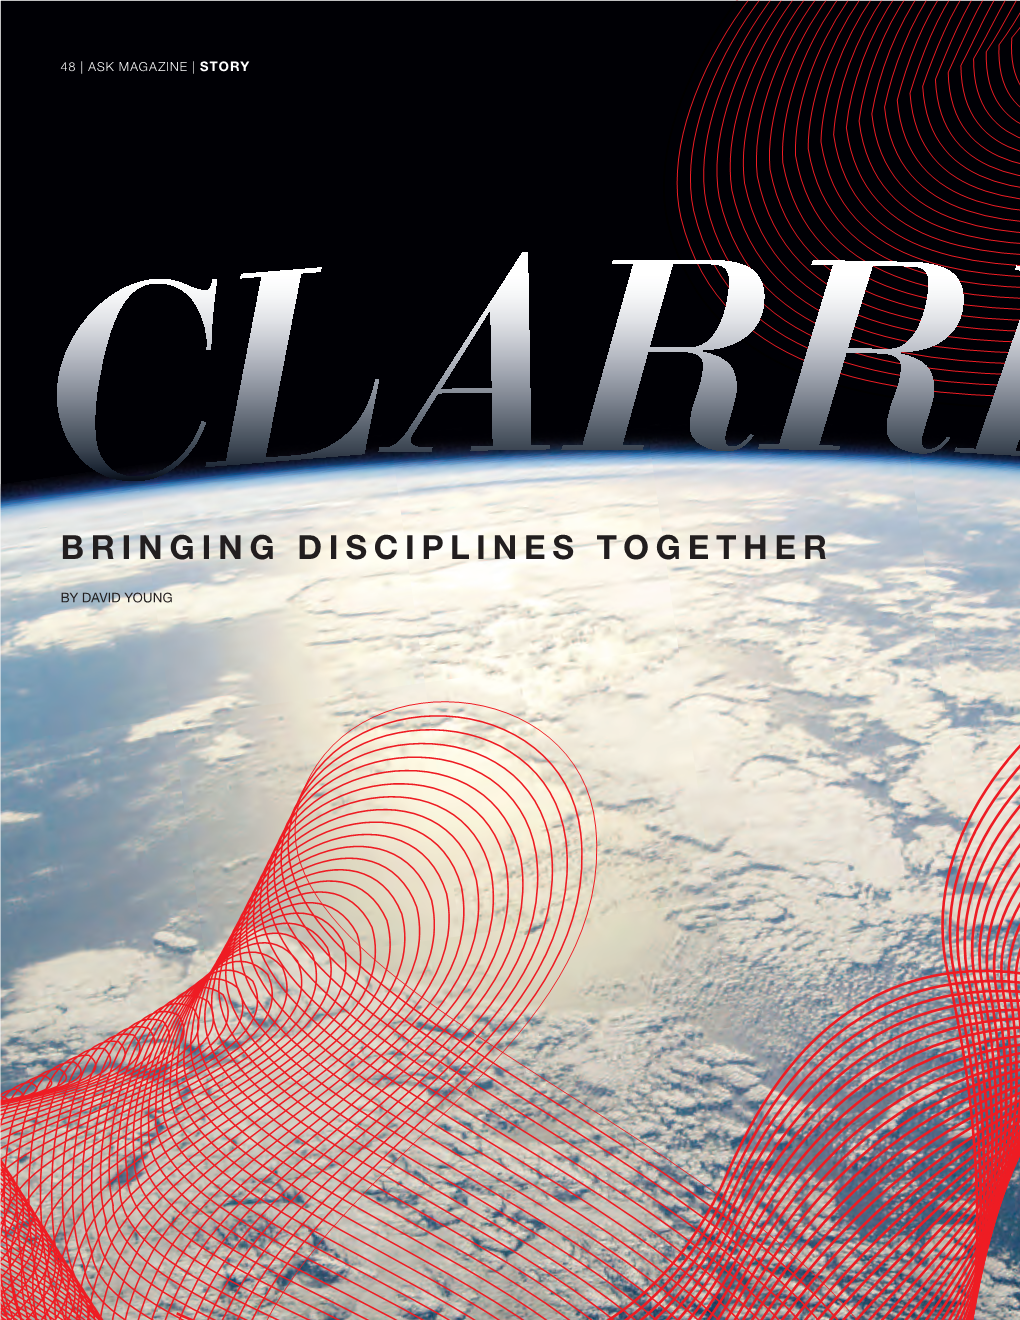 Bringing Disciplines Together Clarreo: by DAVID YOUNG Photo Credit: NASA Been Possible with Existing Instruments